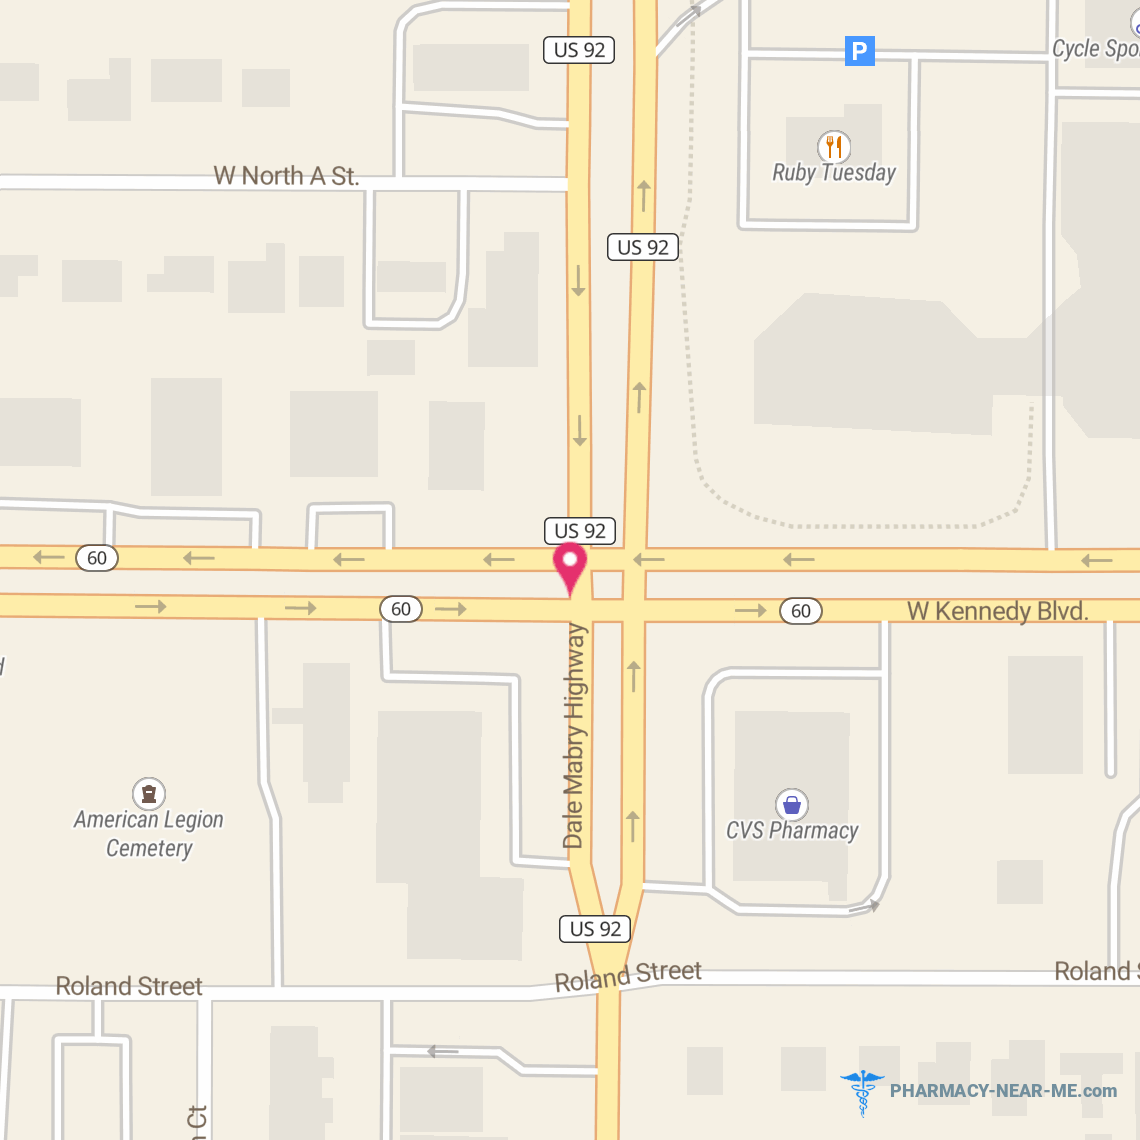 CVS PHARMACY #05815 - Pharmacy Hours, Phone, Reviews & Information: 102 S Dale Mabry Hwy, Tampa, Florida 33609, United States